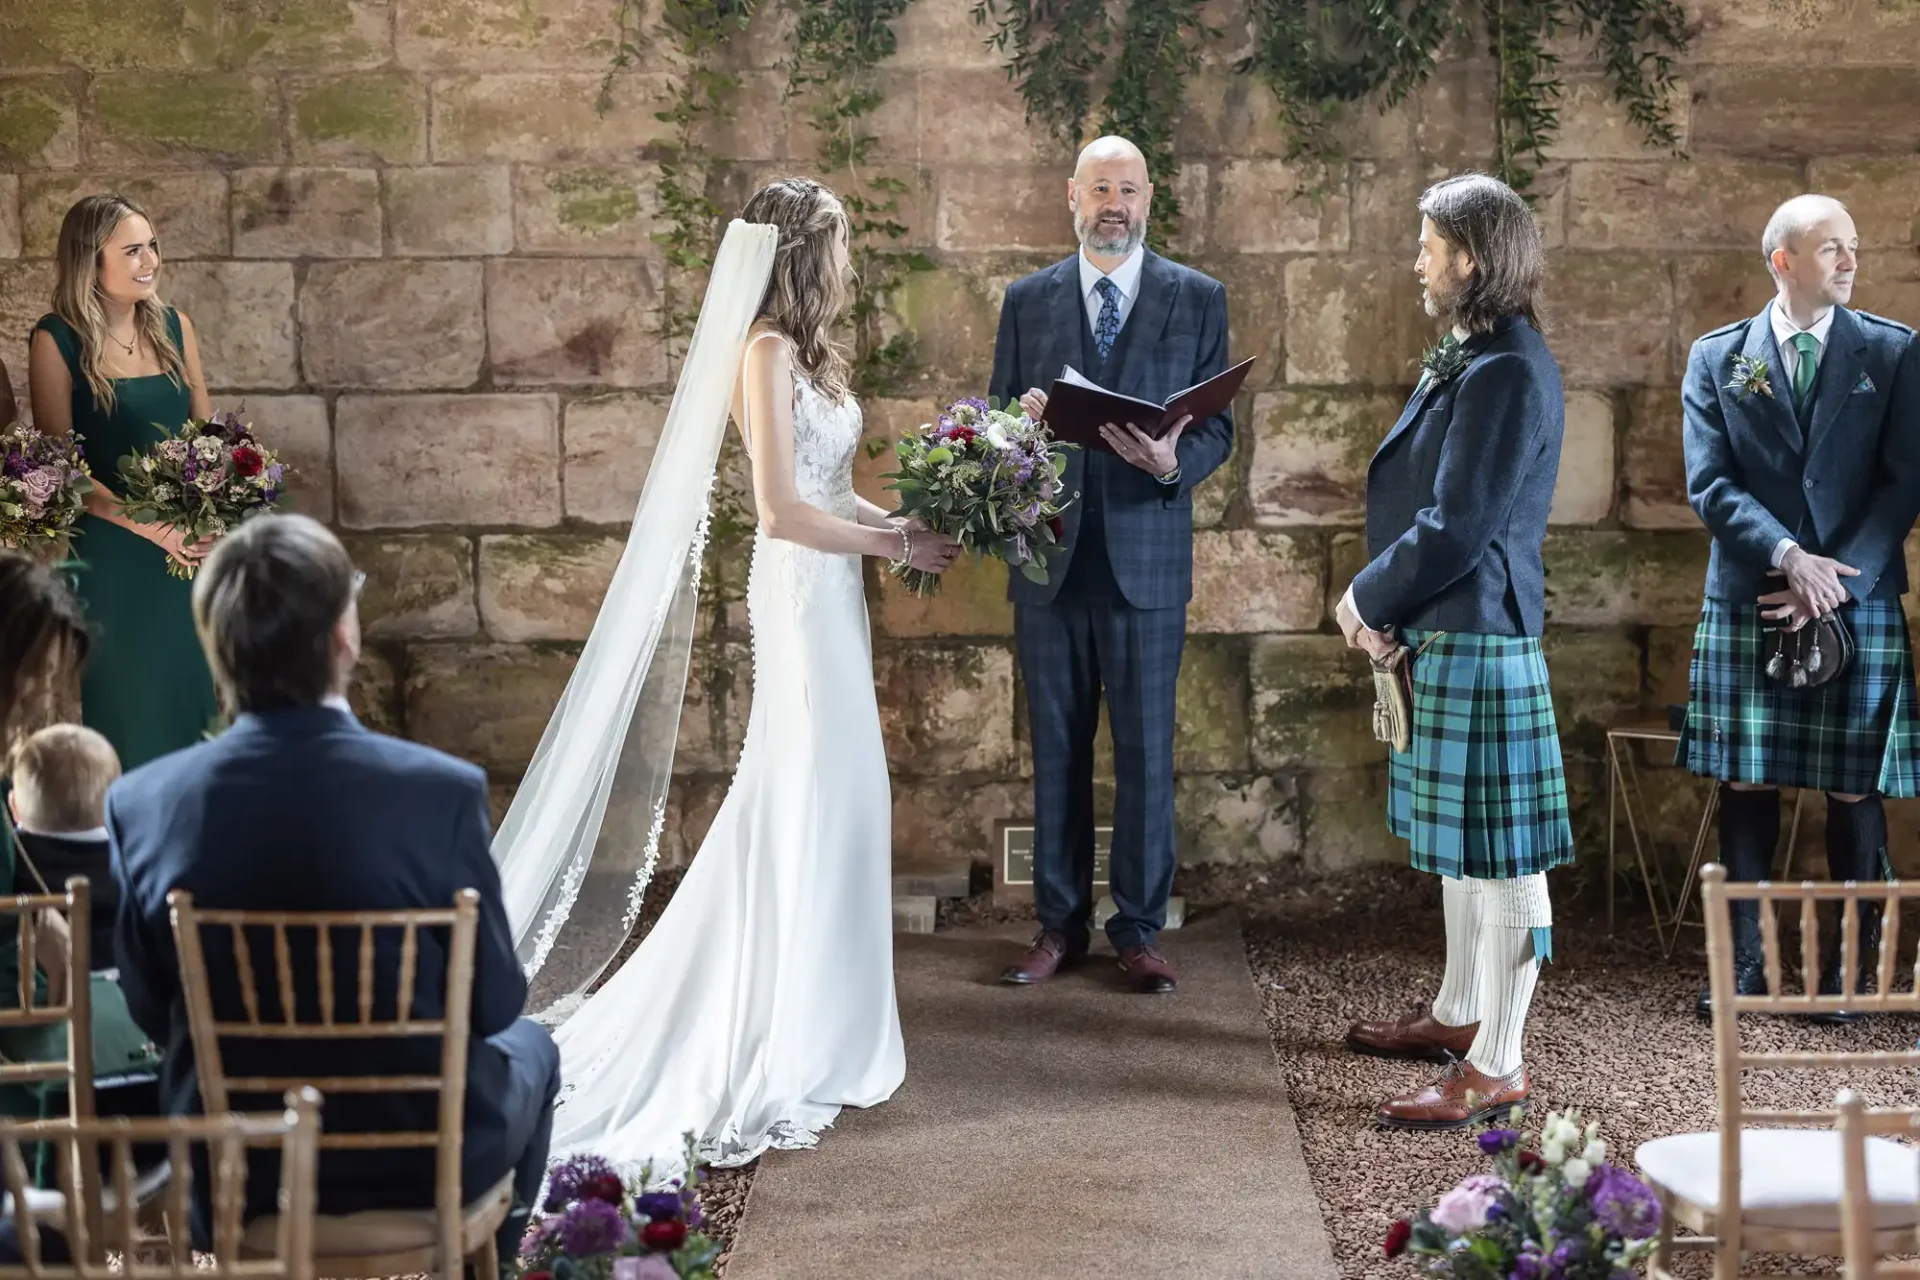 A wedding ceremony takes place with a bride in a white dress and veil and a groom in a kilt, standing before an officiant. Bridesmaids and guests are seated and observing the event in a rustic setting.